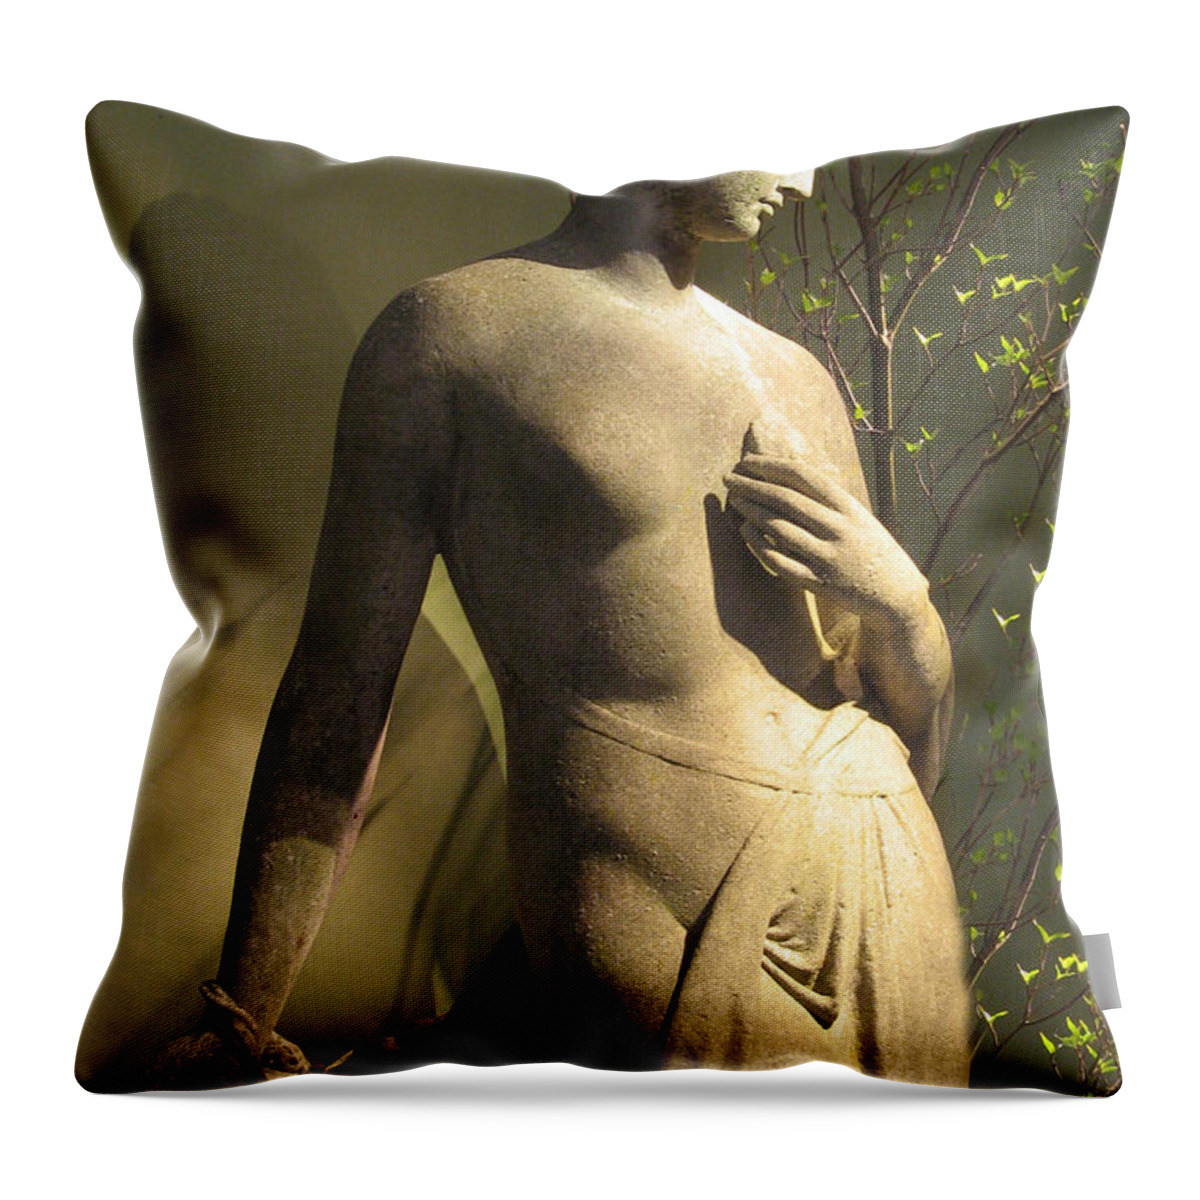 Statue Throw Pillow featuring the photograph Statuesque by Jessica Jenney